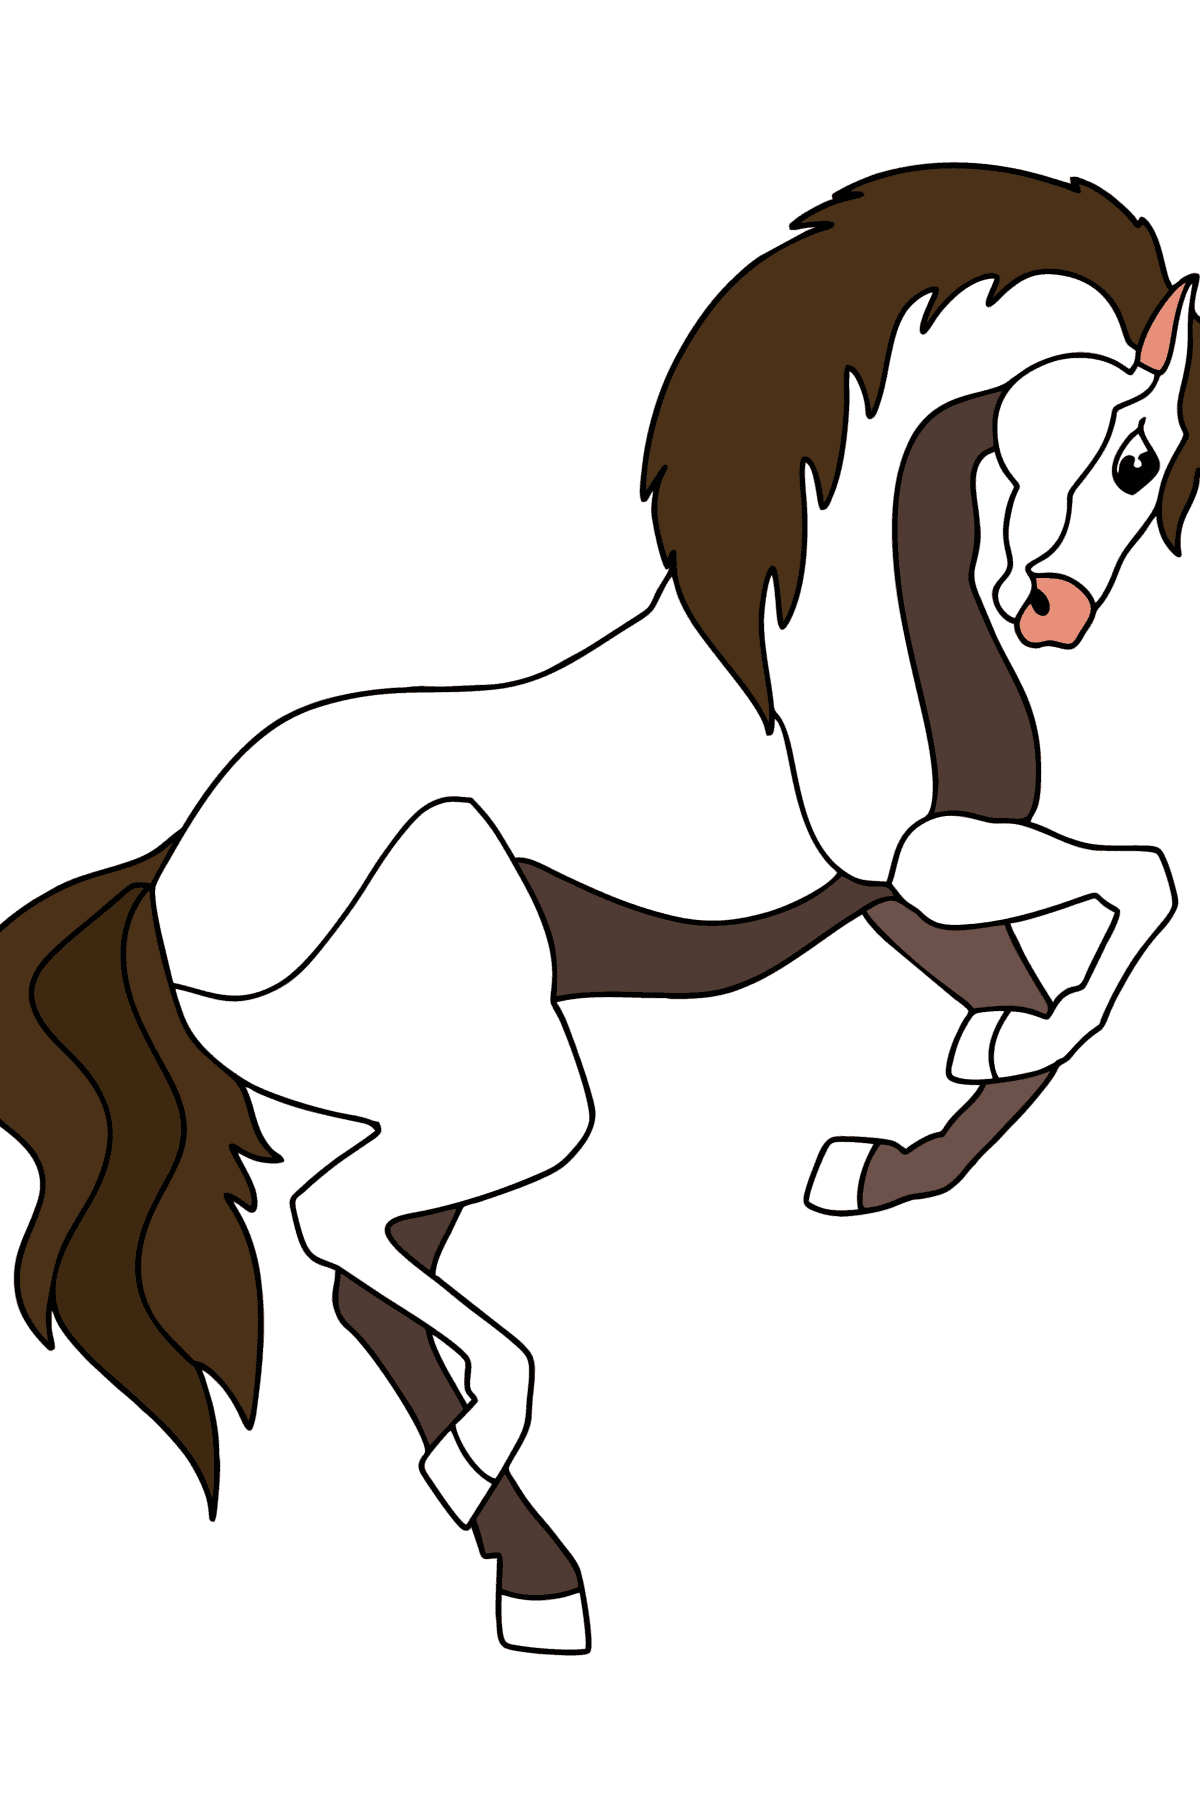 Mustang сoloring page - Coloring Pages for Kids